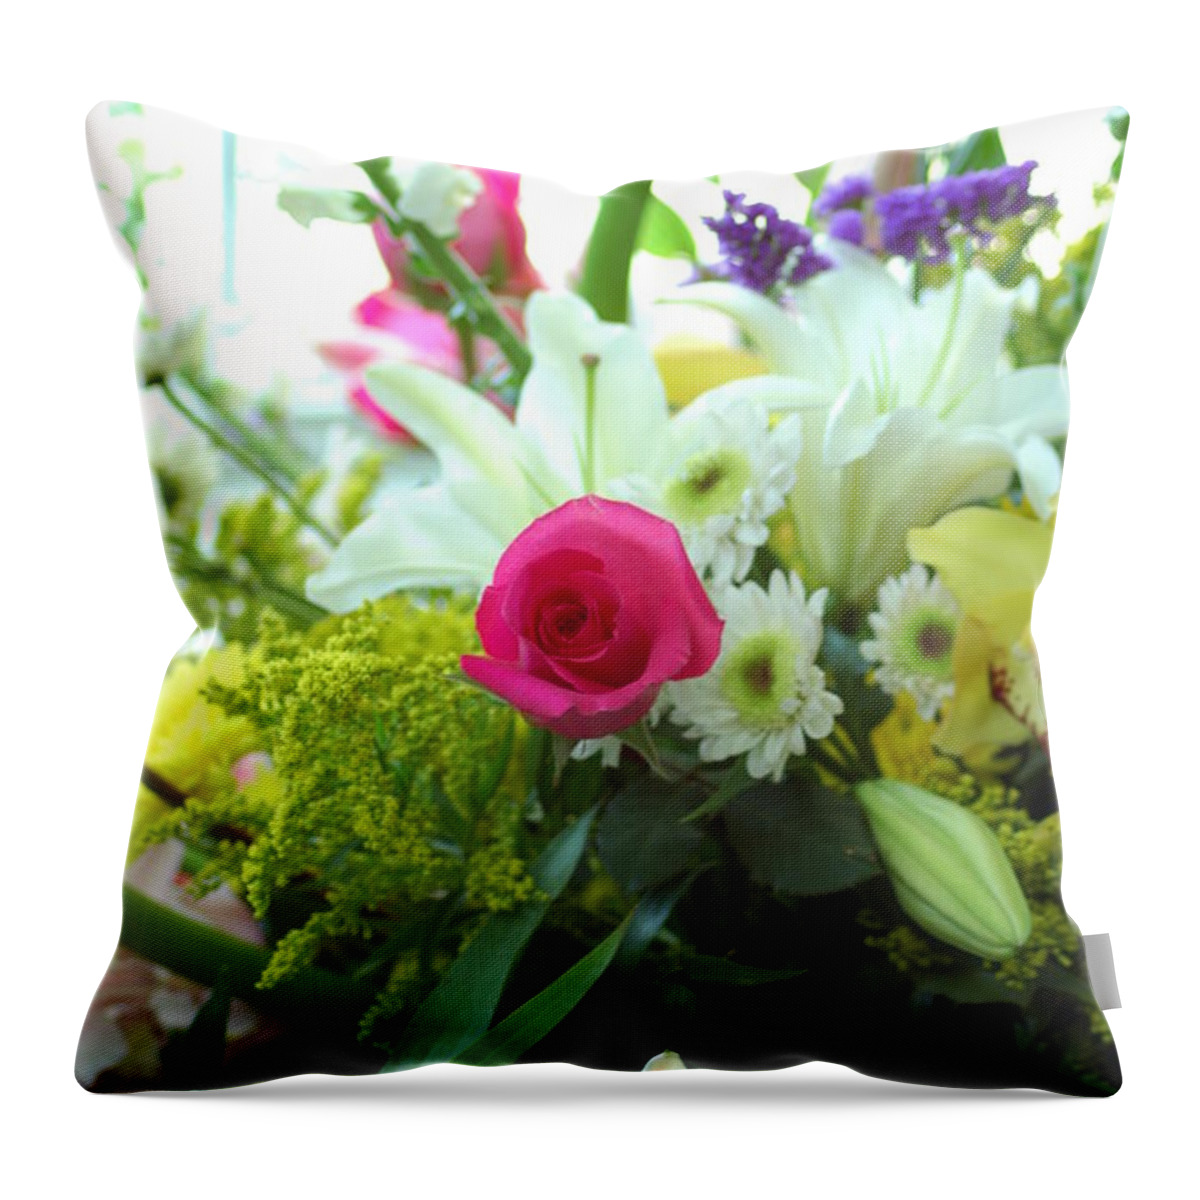 Floral Throw Pillow featuring the photograph Stand Out by M West